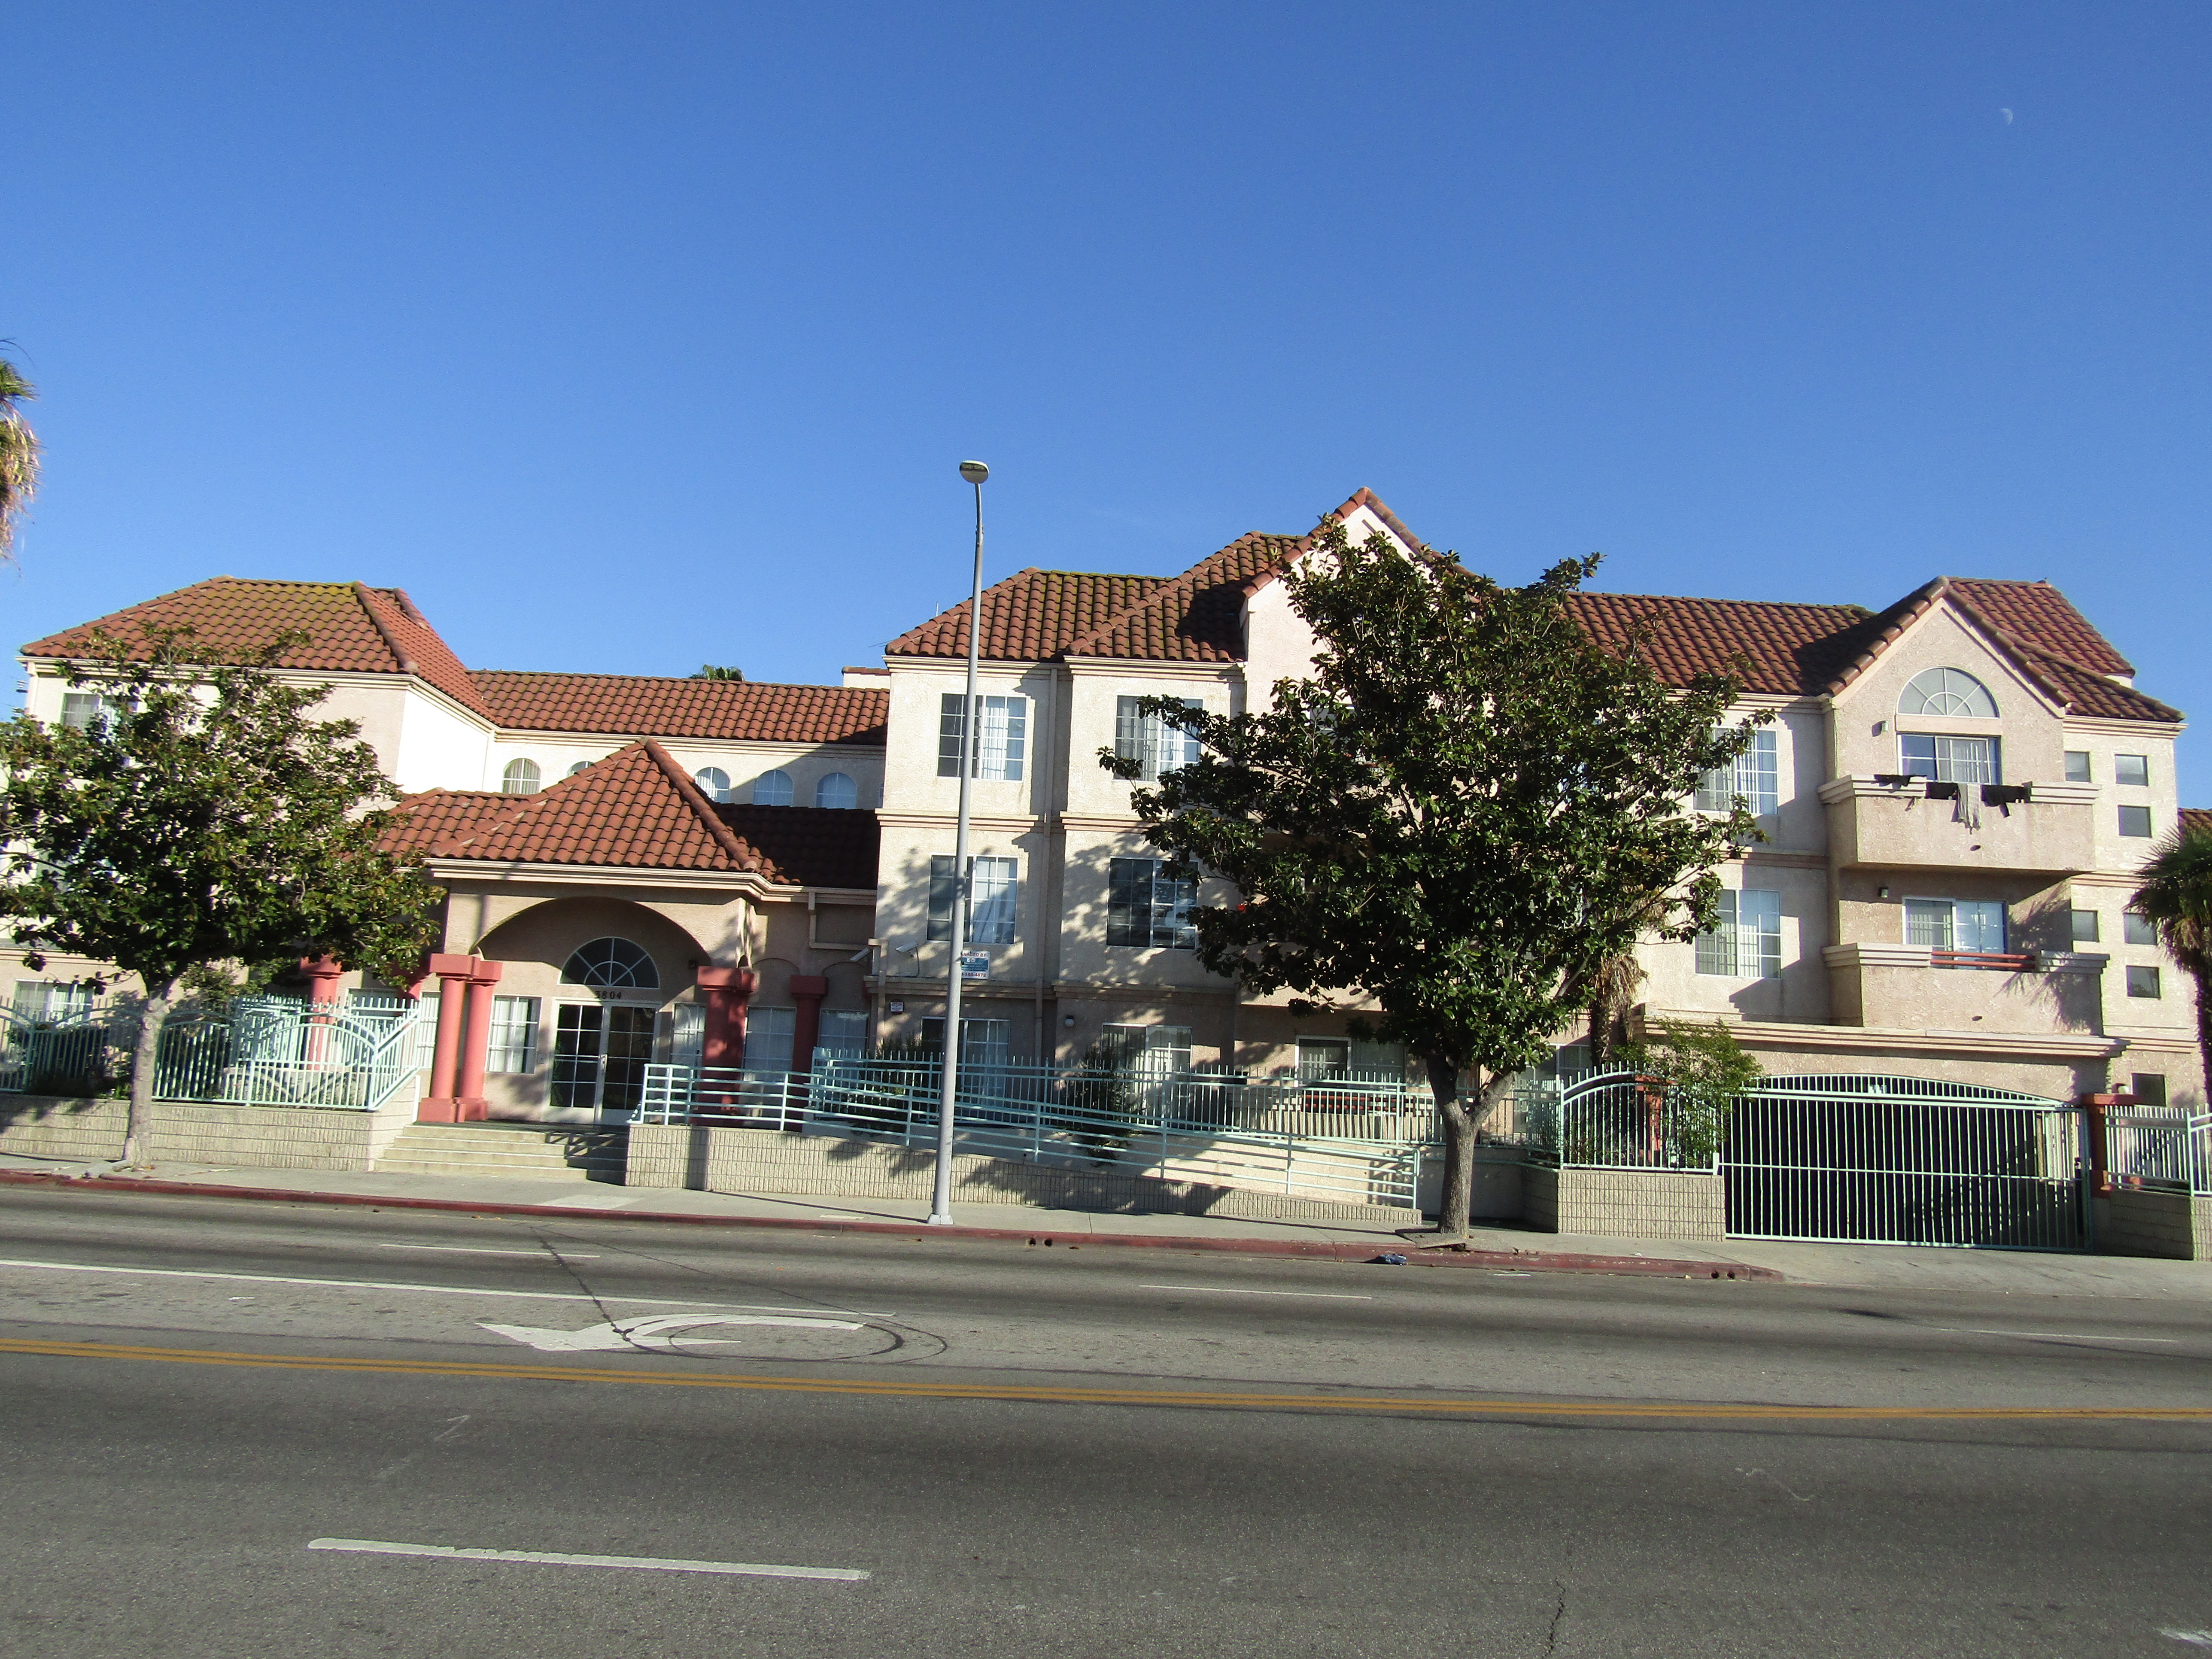 Front view of a three story light brown building. Entrance has stair and ramp access. There is a gated parking entrance. Units facing the street have balconies. There are two trees in front of the building,